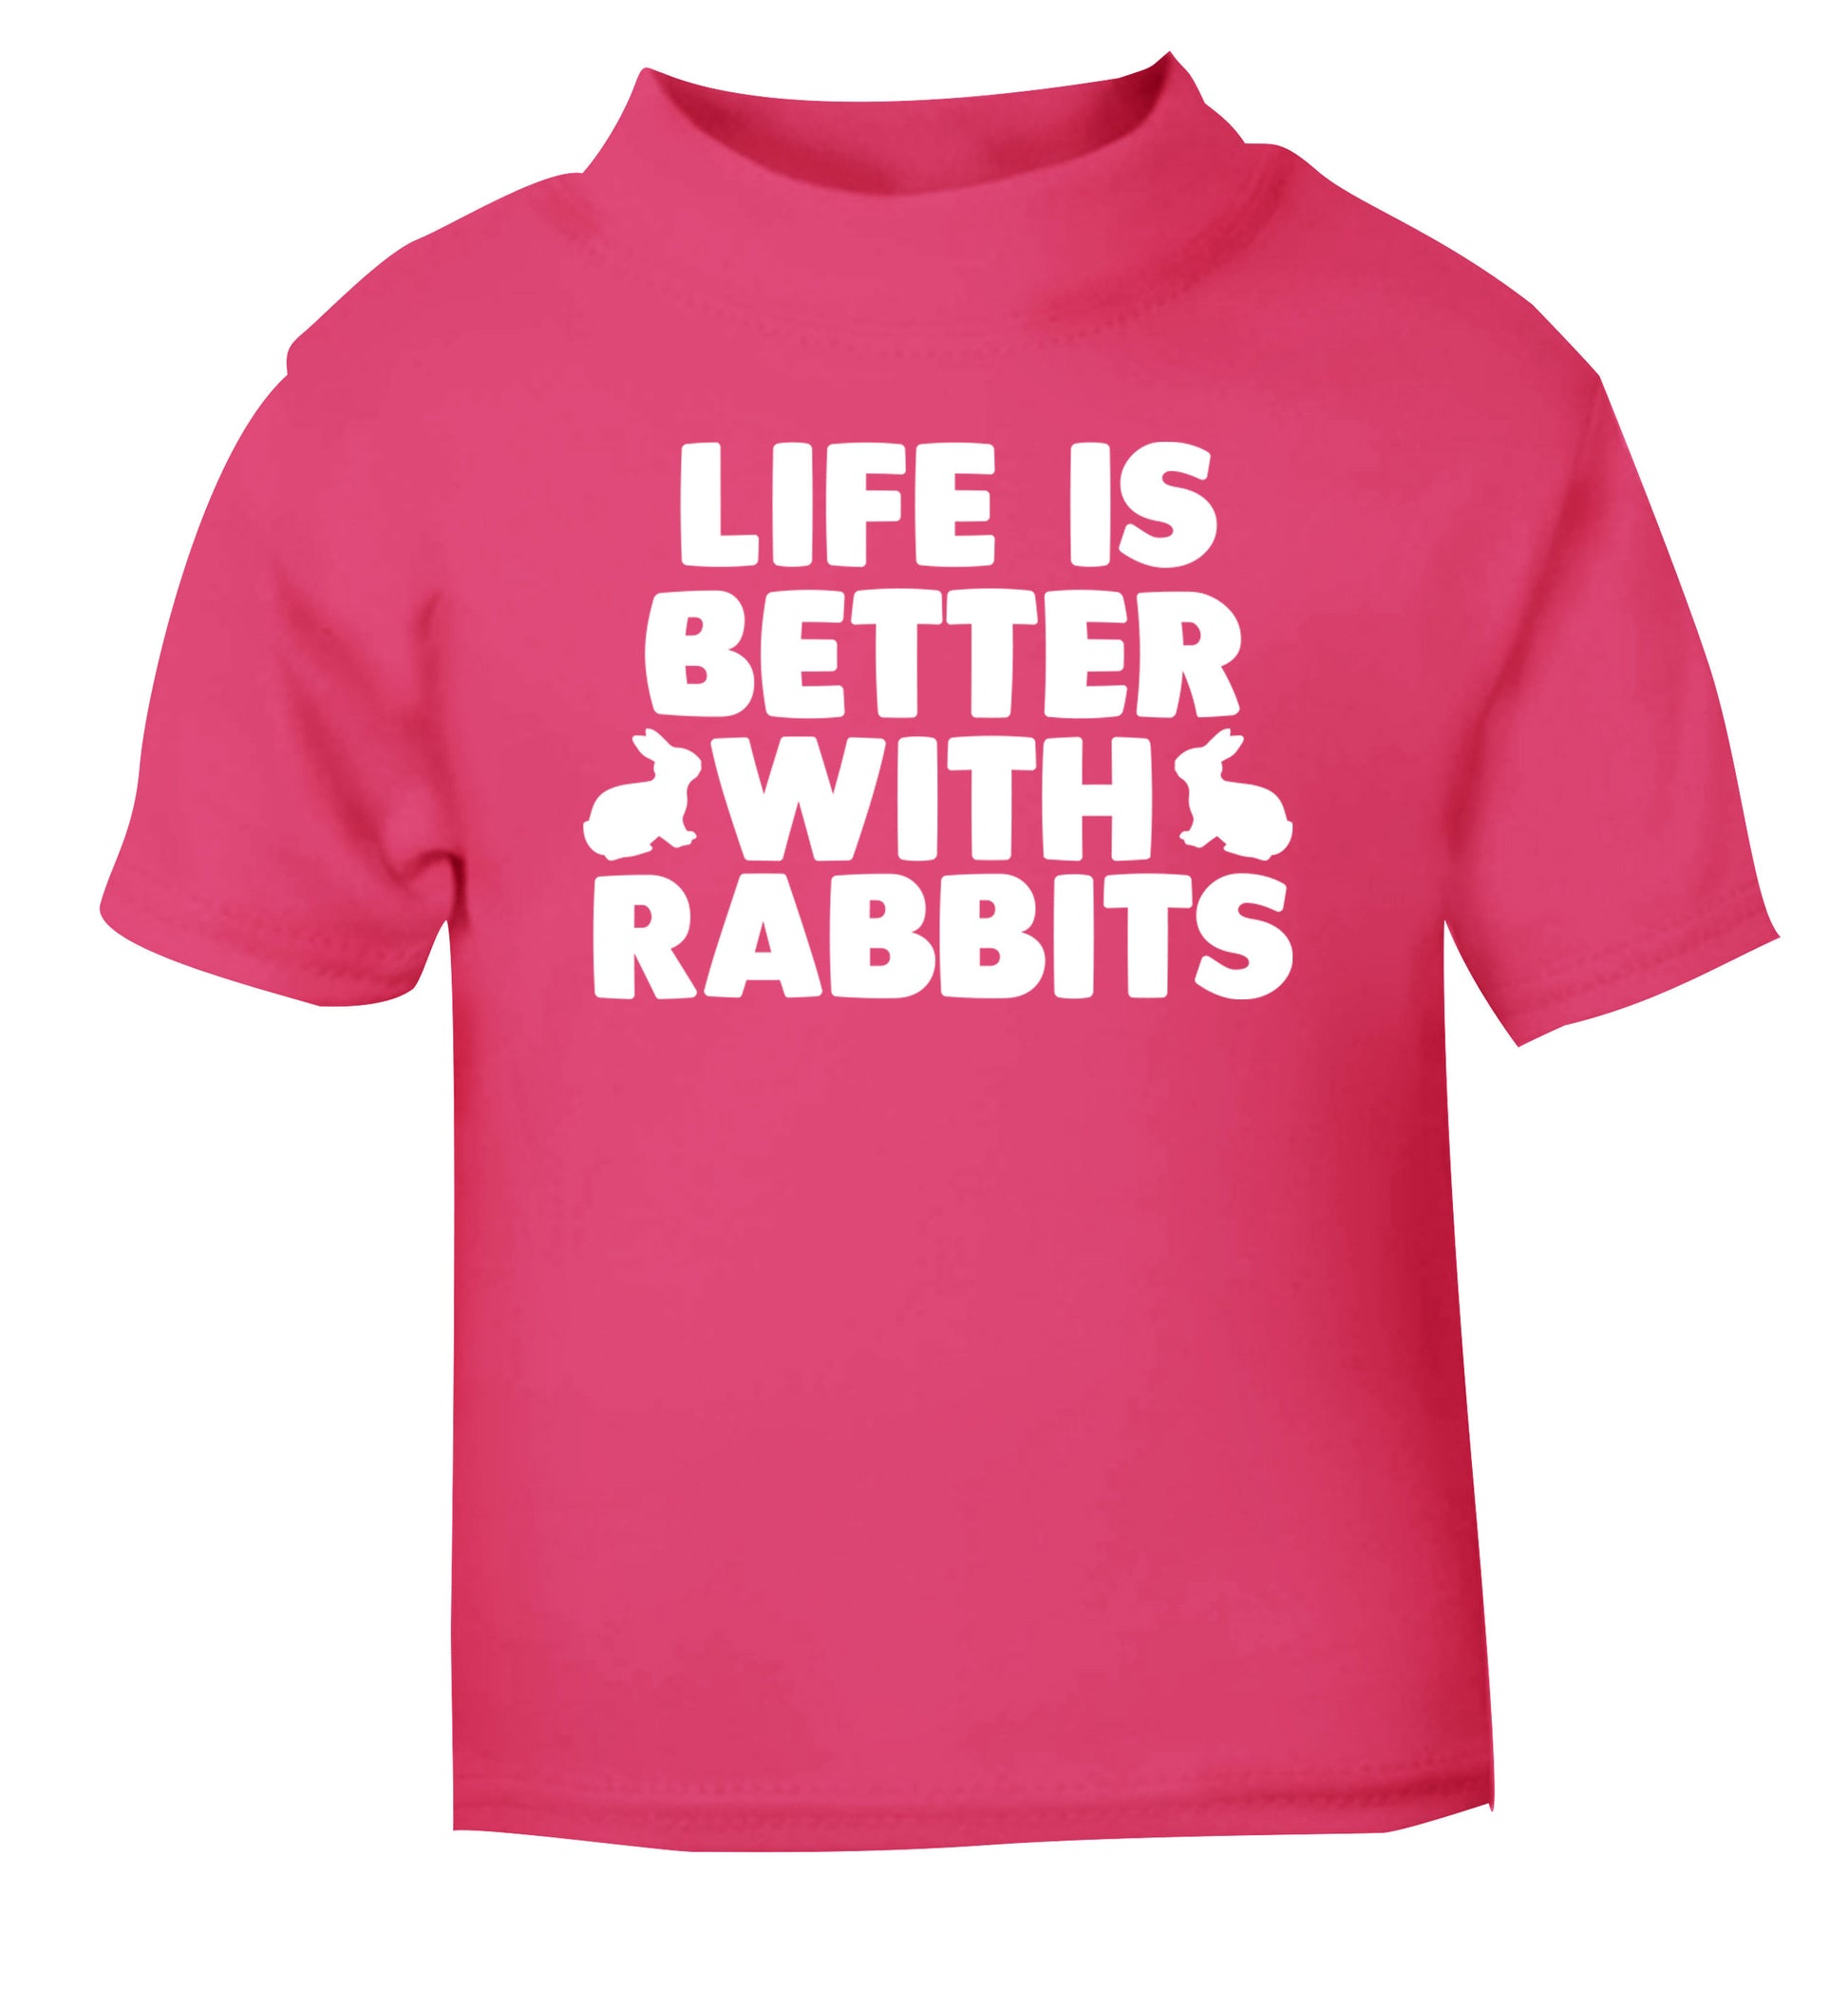 Life is better with rabbits pink Baby Toddler Tshirt 2 Years